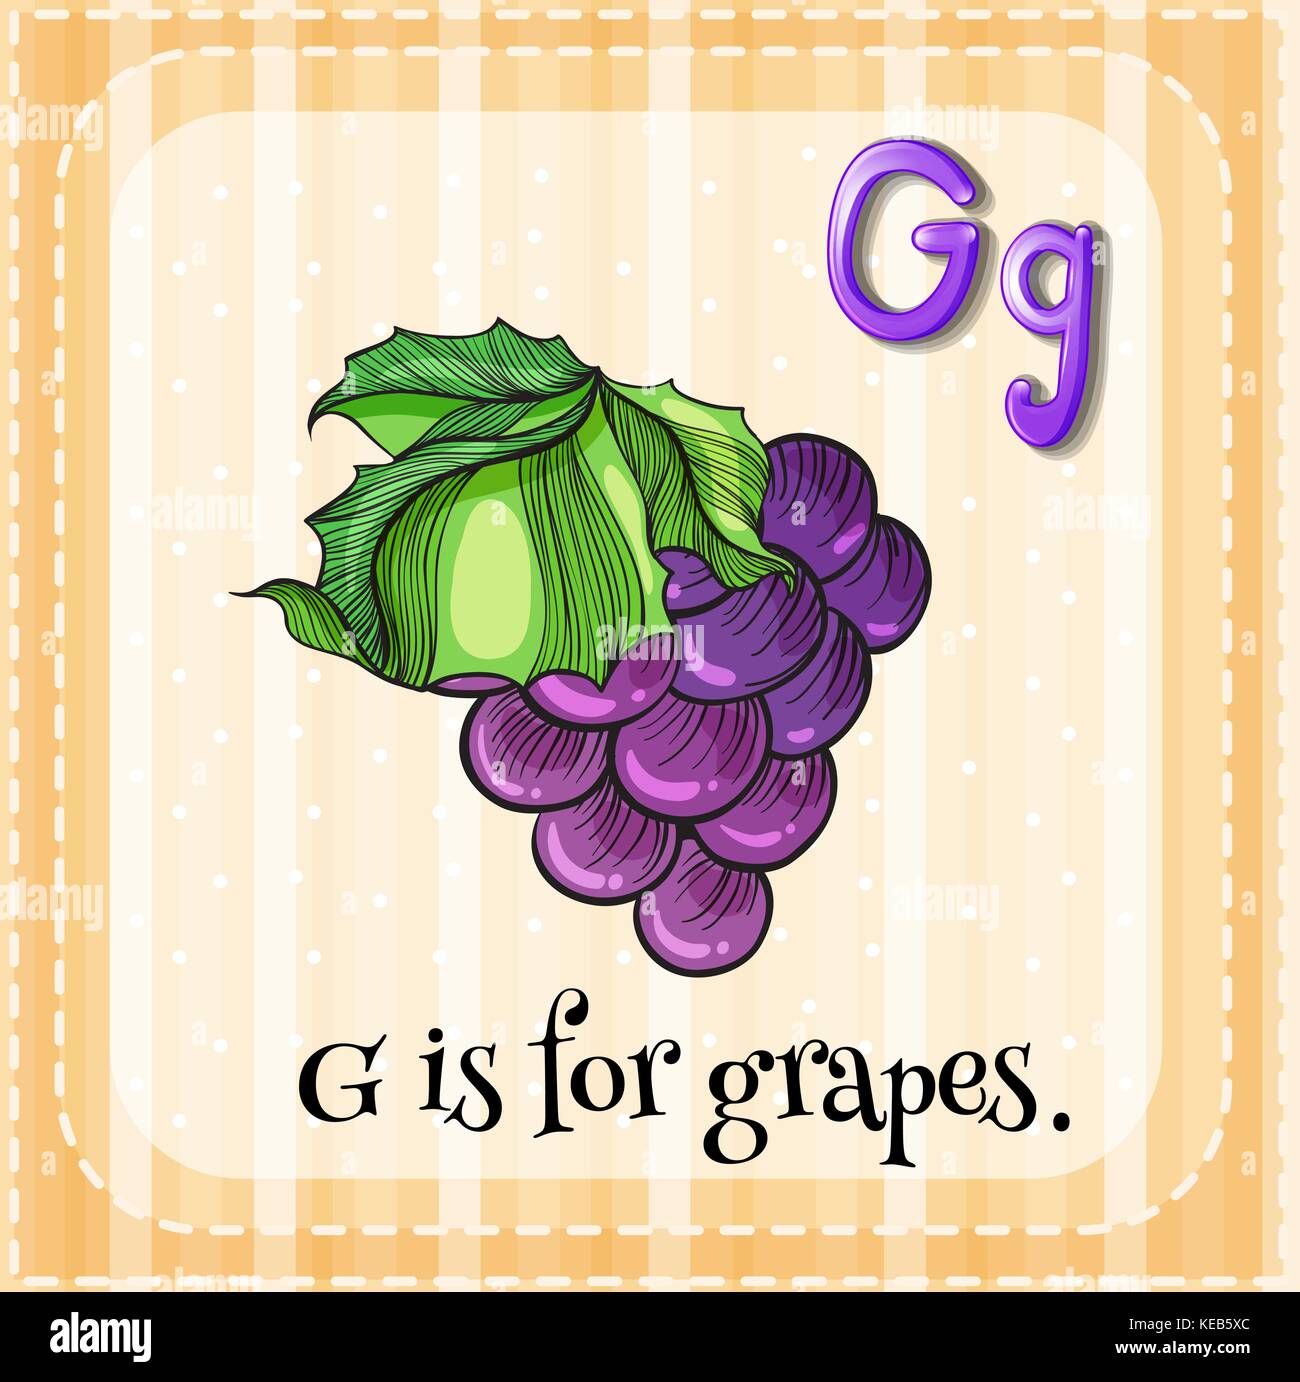 Flashcard letter G is for grapes Stock Vector